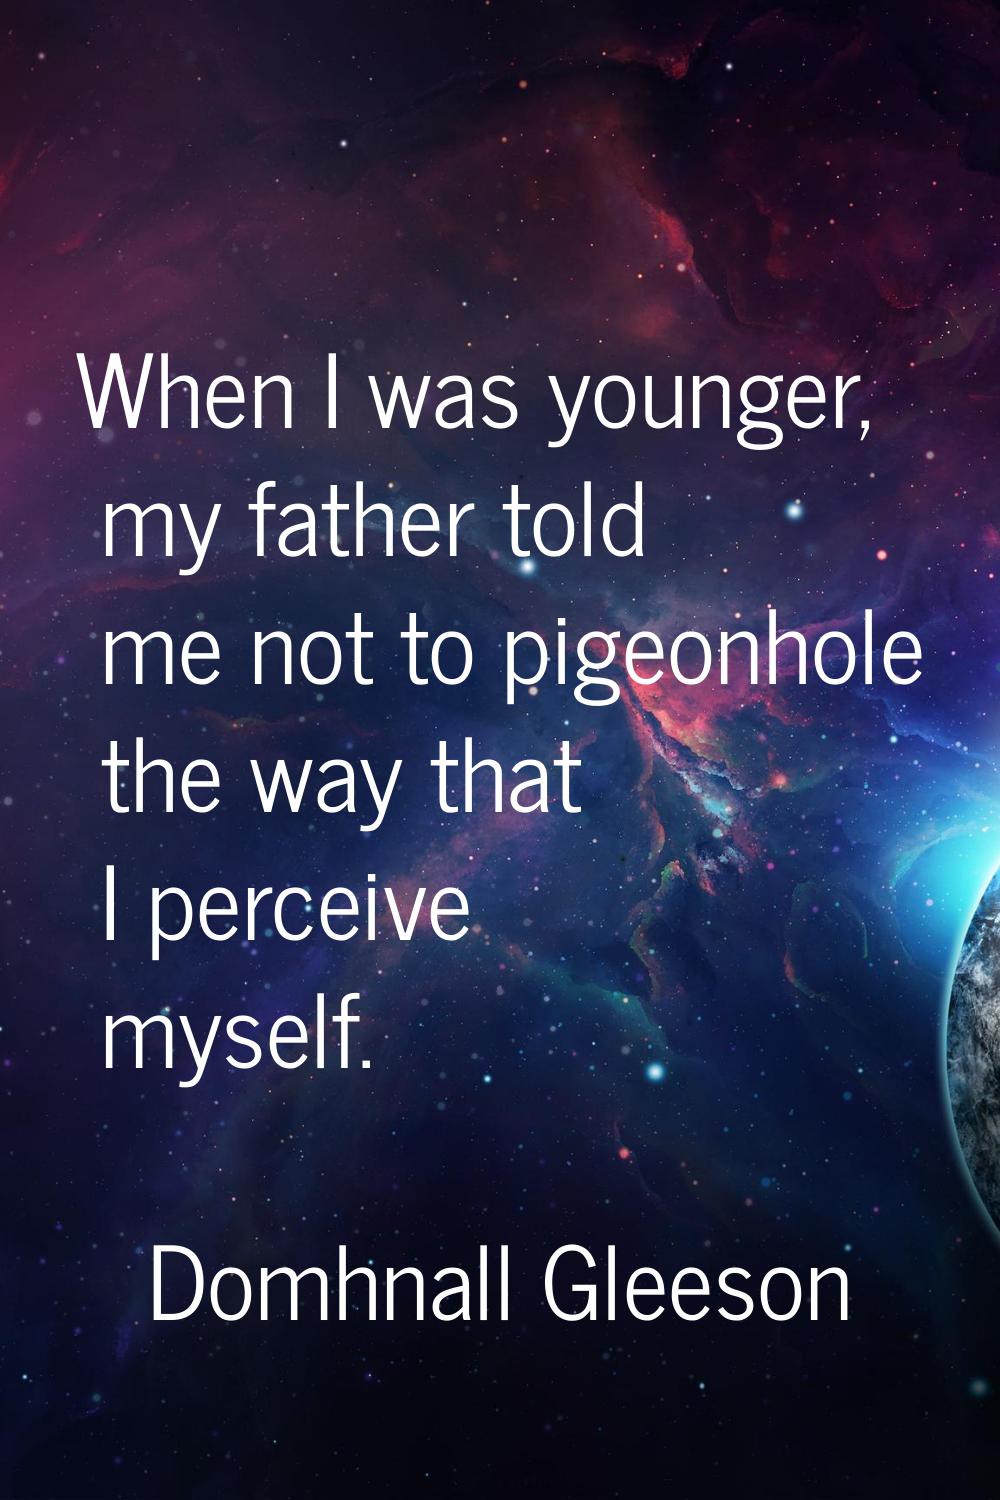 When I was younger, my father told me not to pigeonhole the way that I perceive myself.